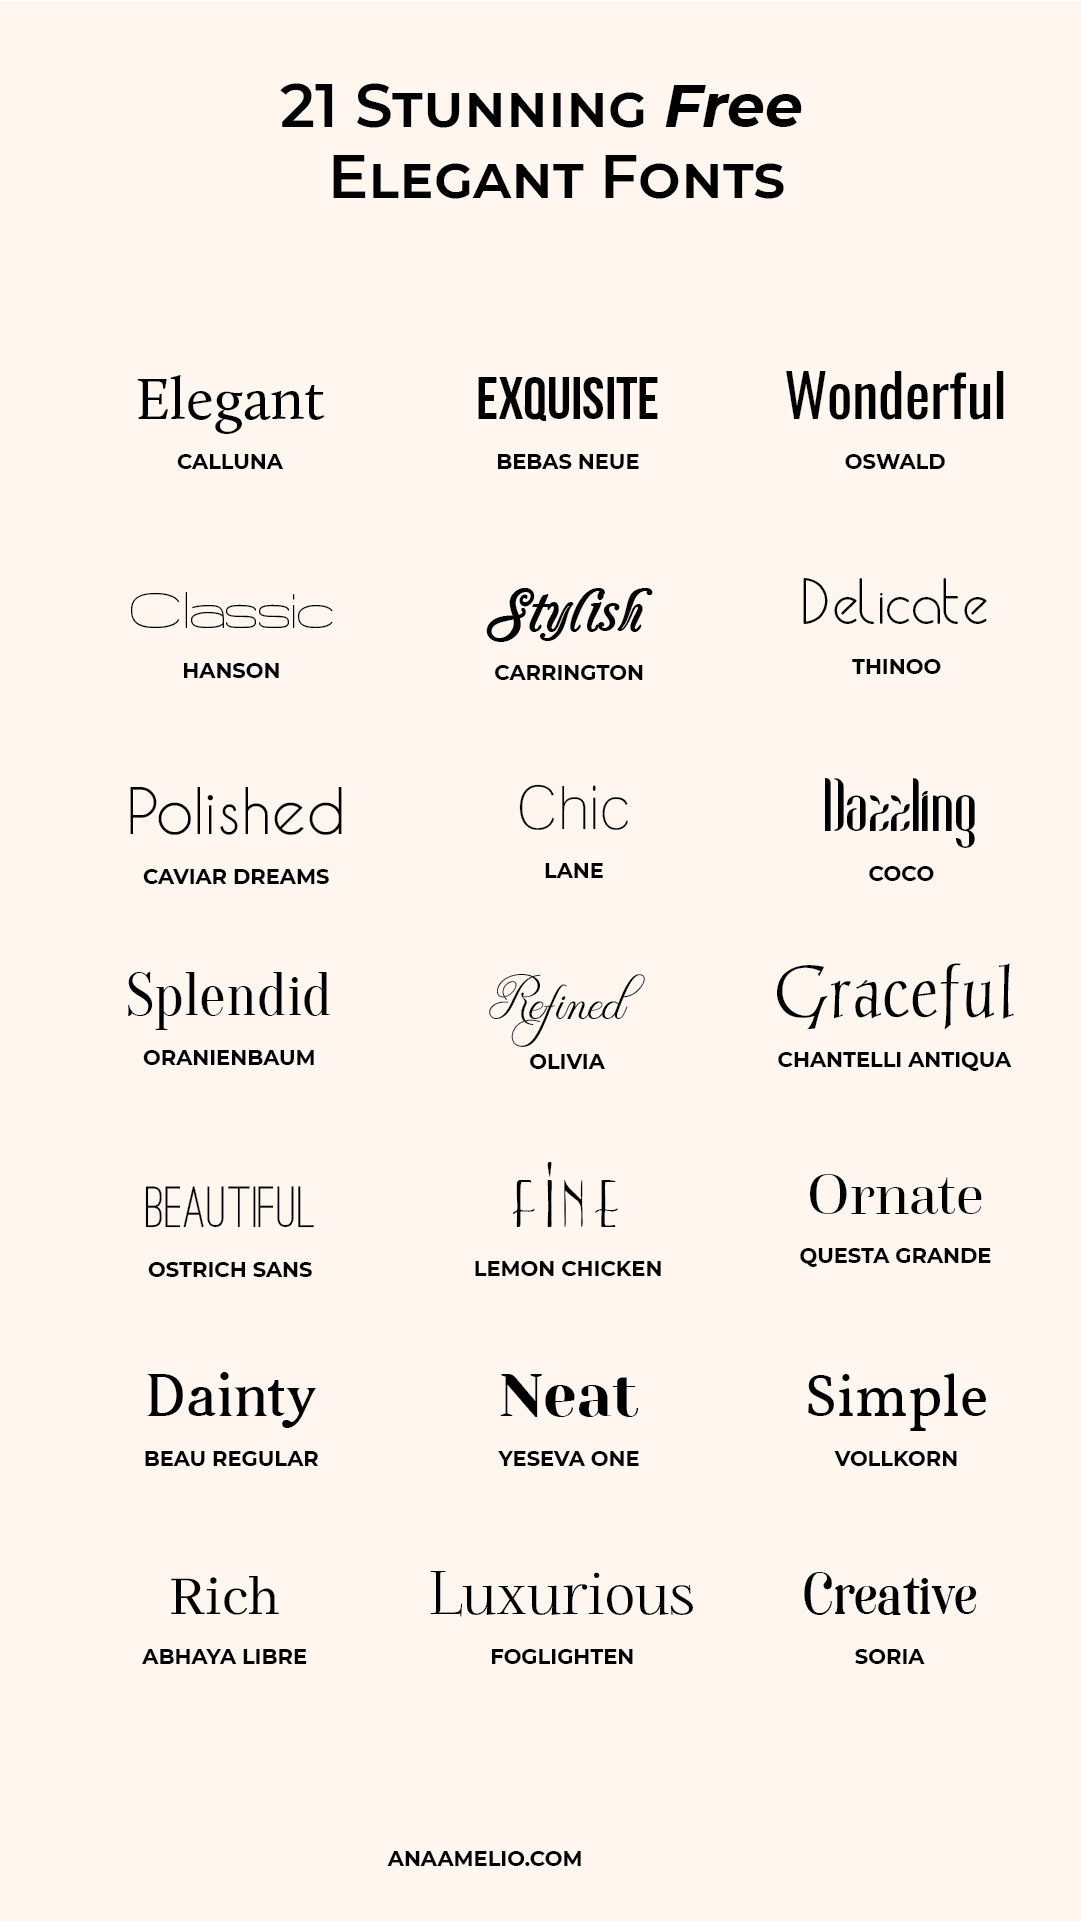 What are elegant fonts?